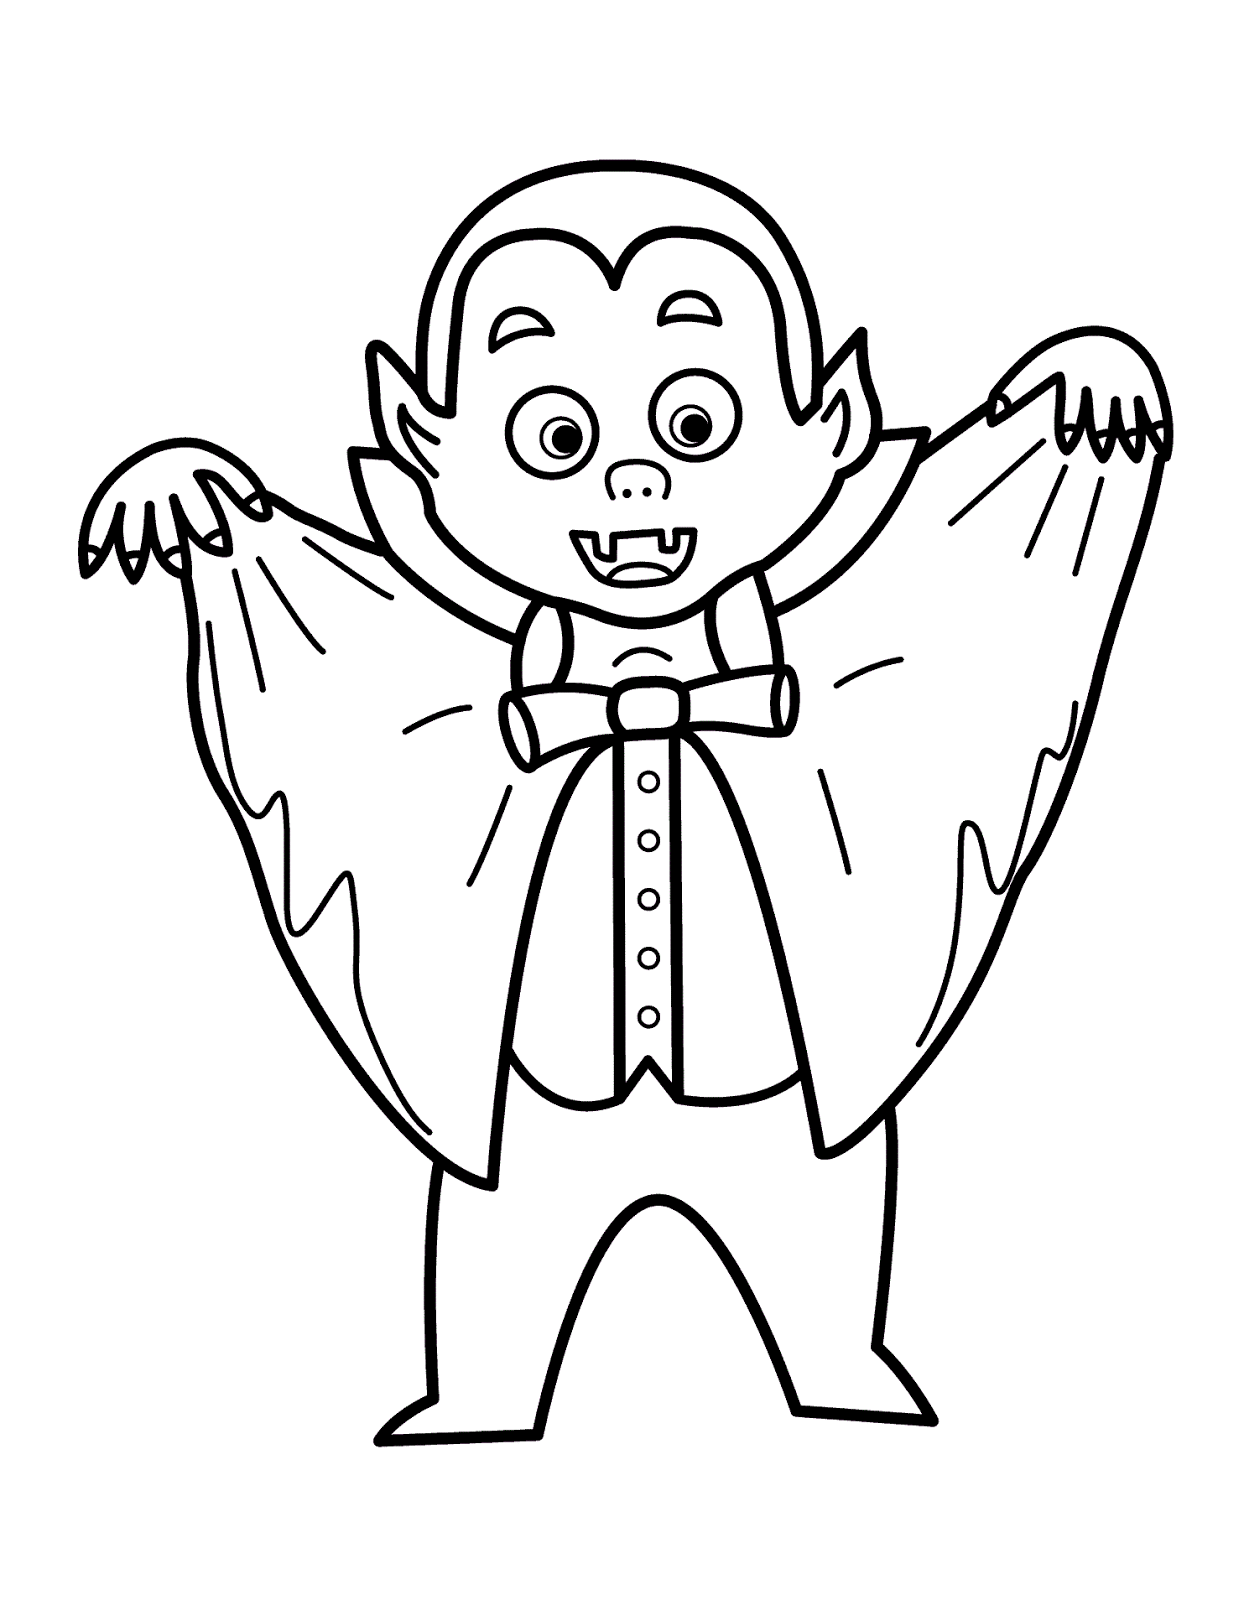 Download Free Vampire Coloring Pages To Print